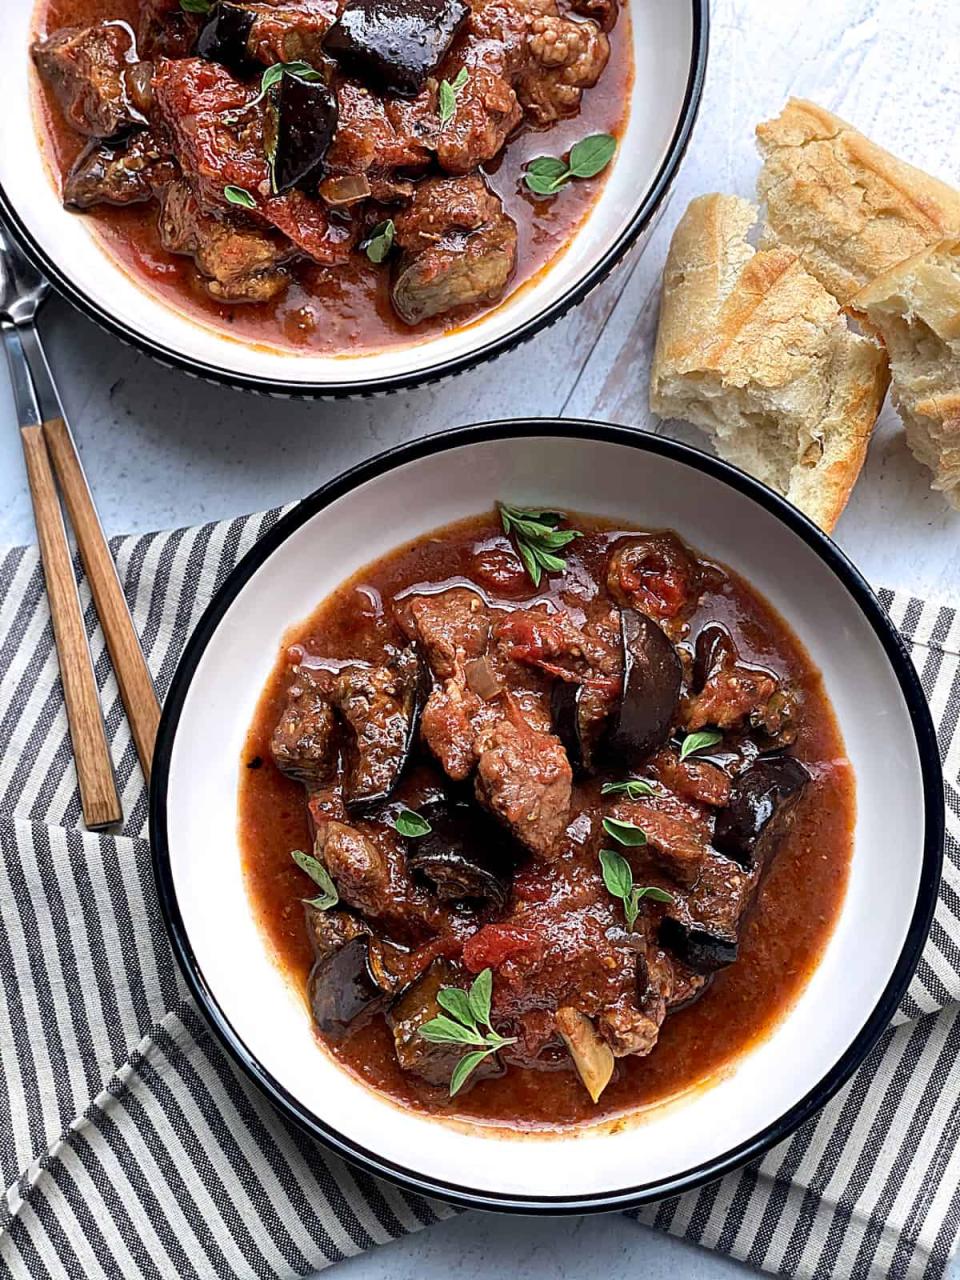 Old Fashioned Beef Stew With Eggplant - The Greek Foodie